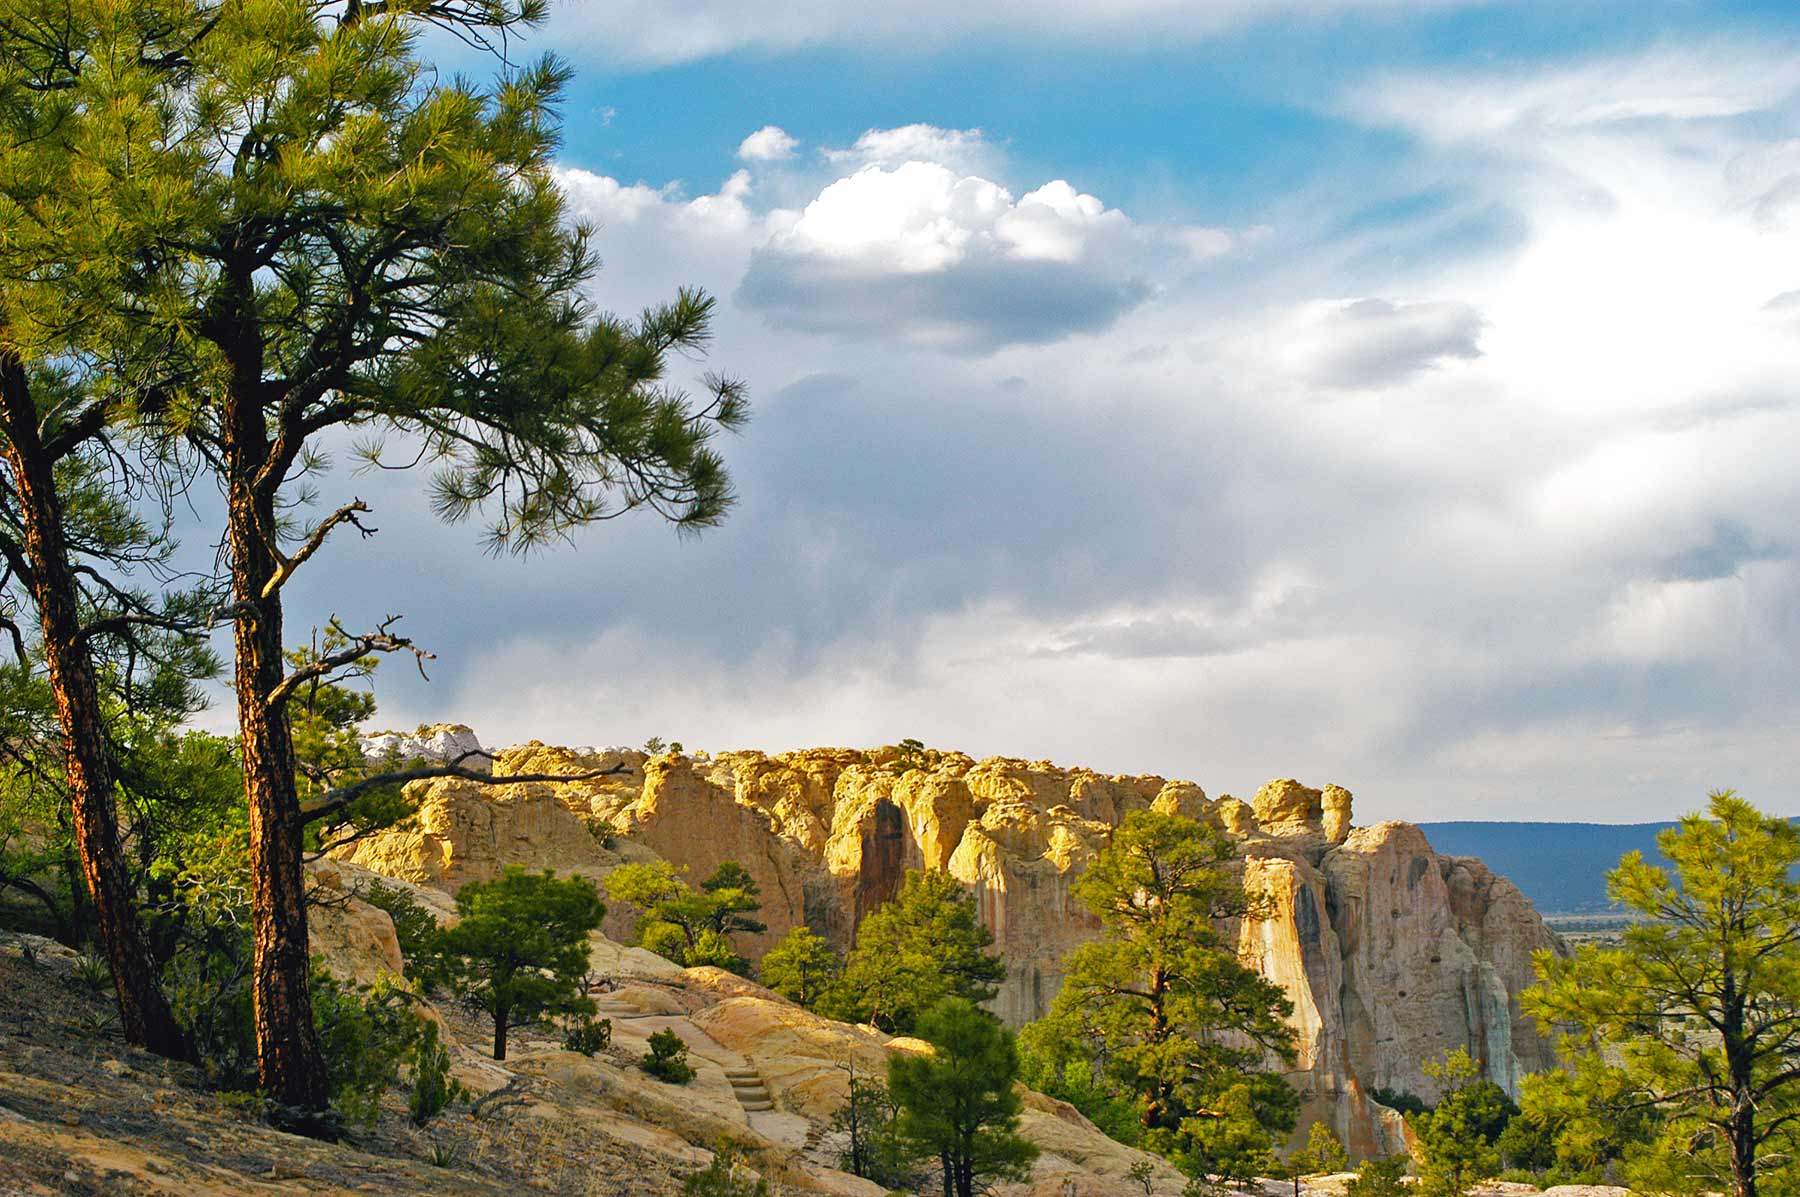 el morro national monument, historic sites in new mexico